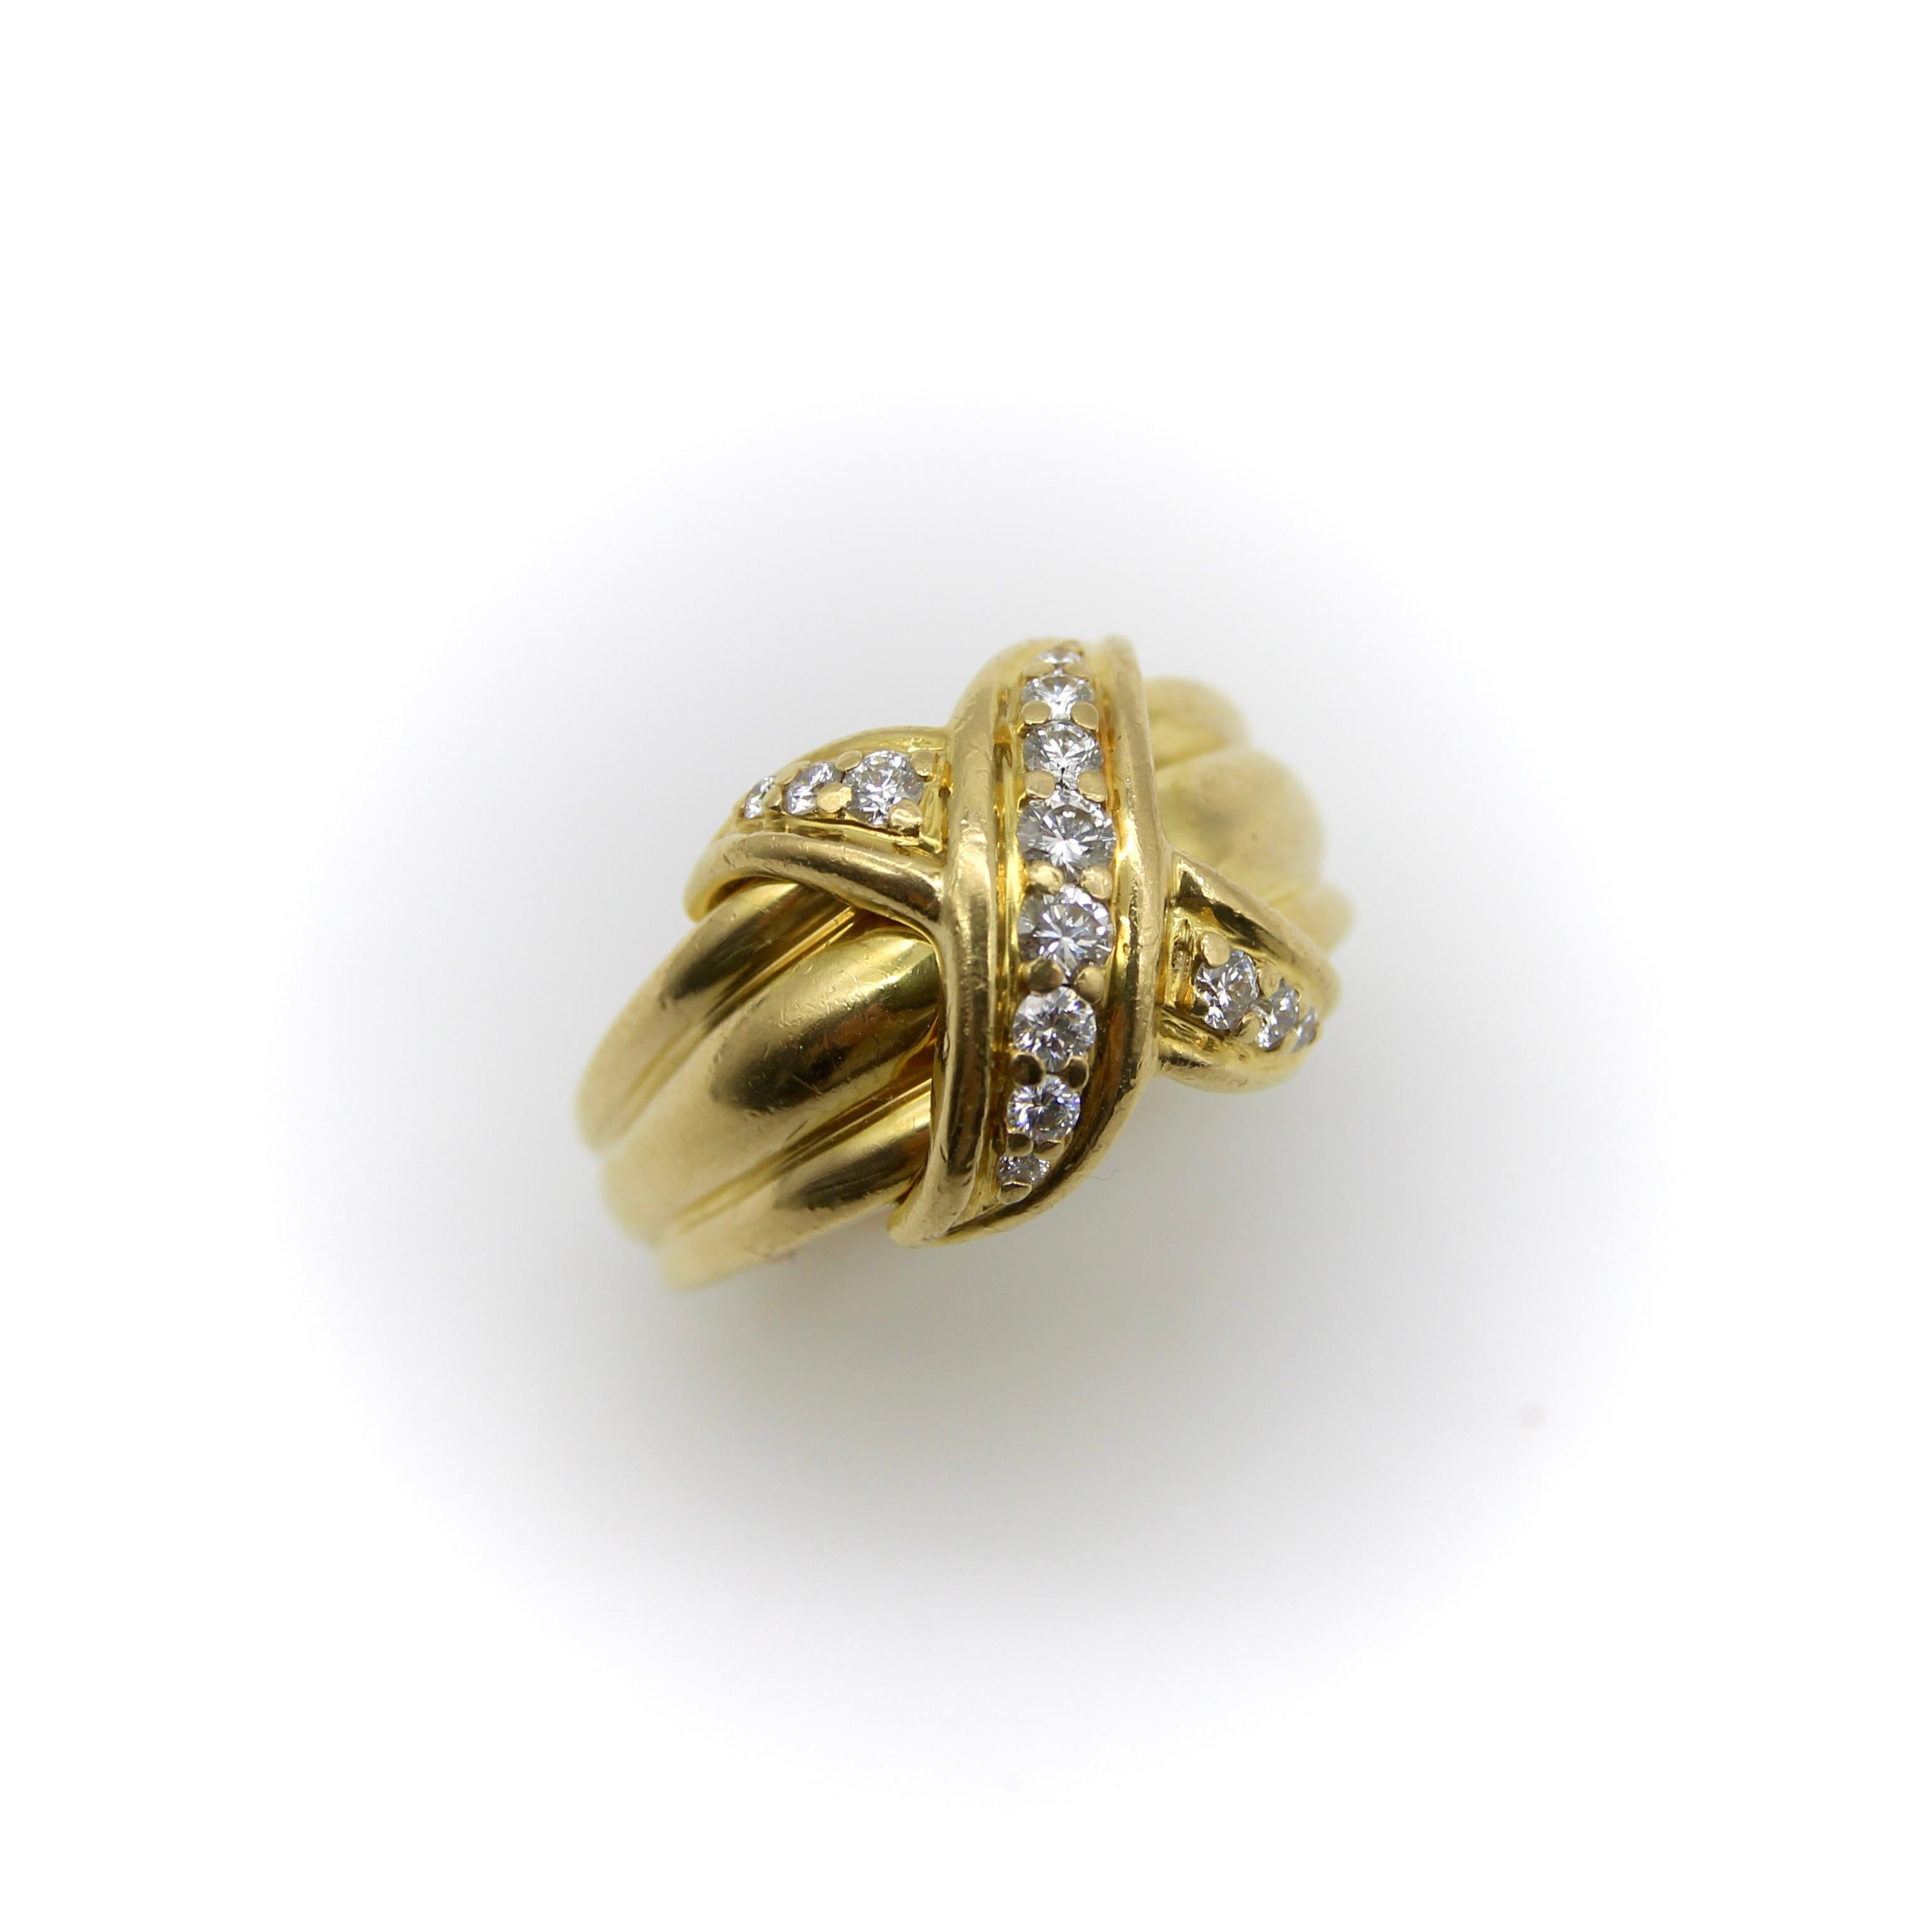 Tiffany & Co.’s signature classic “X” ring was designed by Jean Schlumberger, who famously described his aesthetic by saying “I try to make everything look as if it were growing, uneven, at random, organic, in motion.” In this 18k gold ring, a